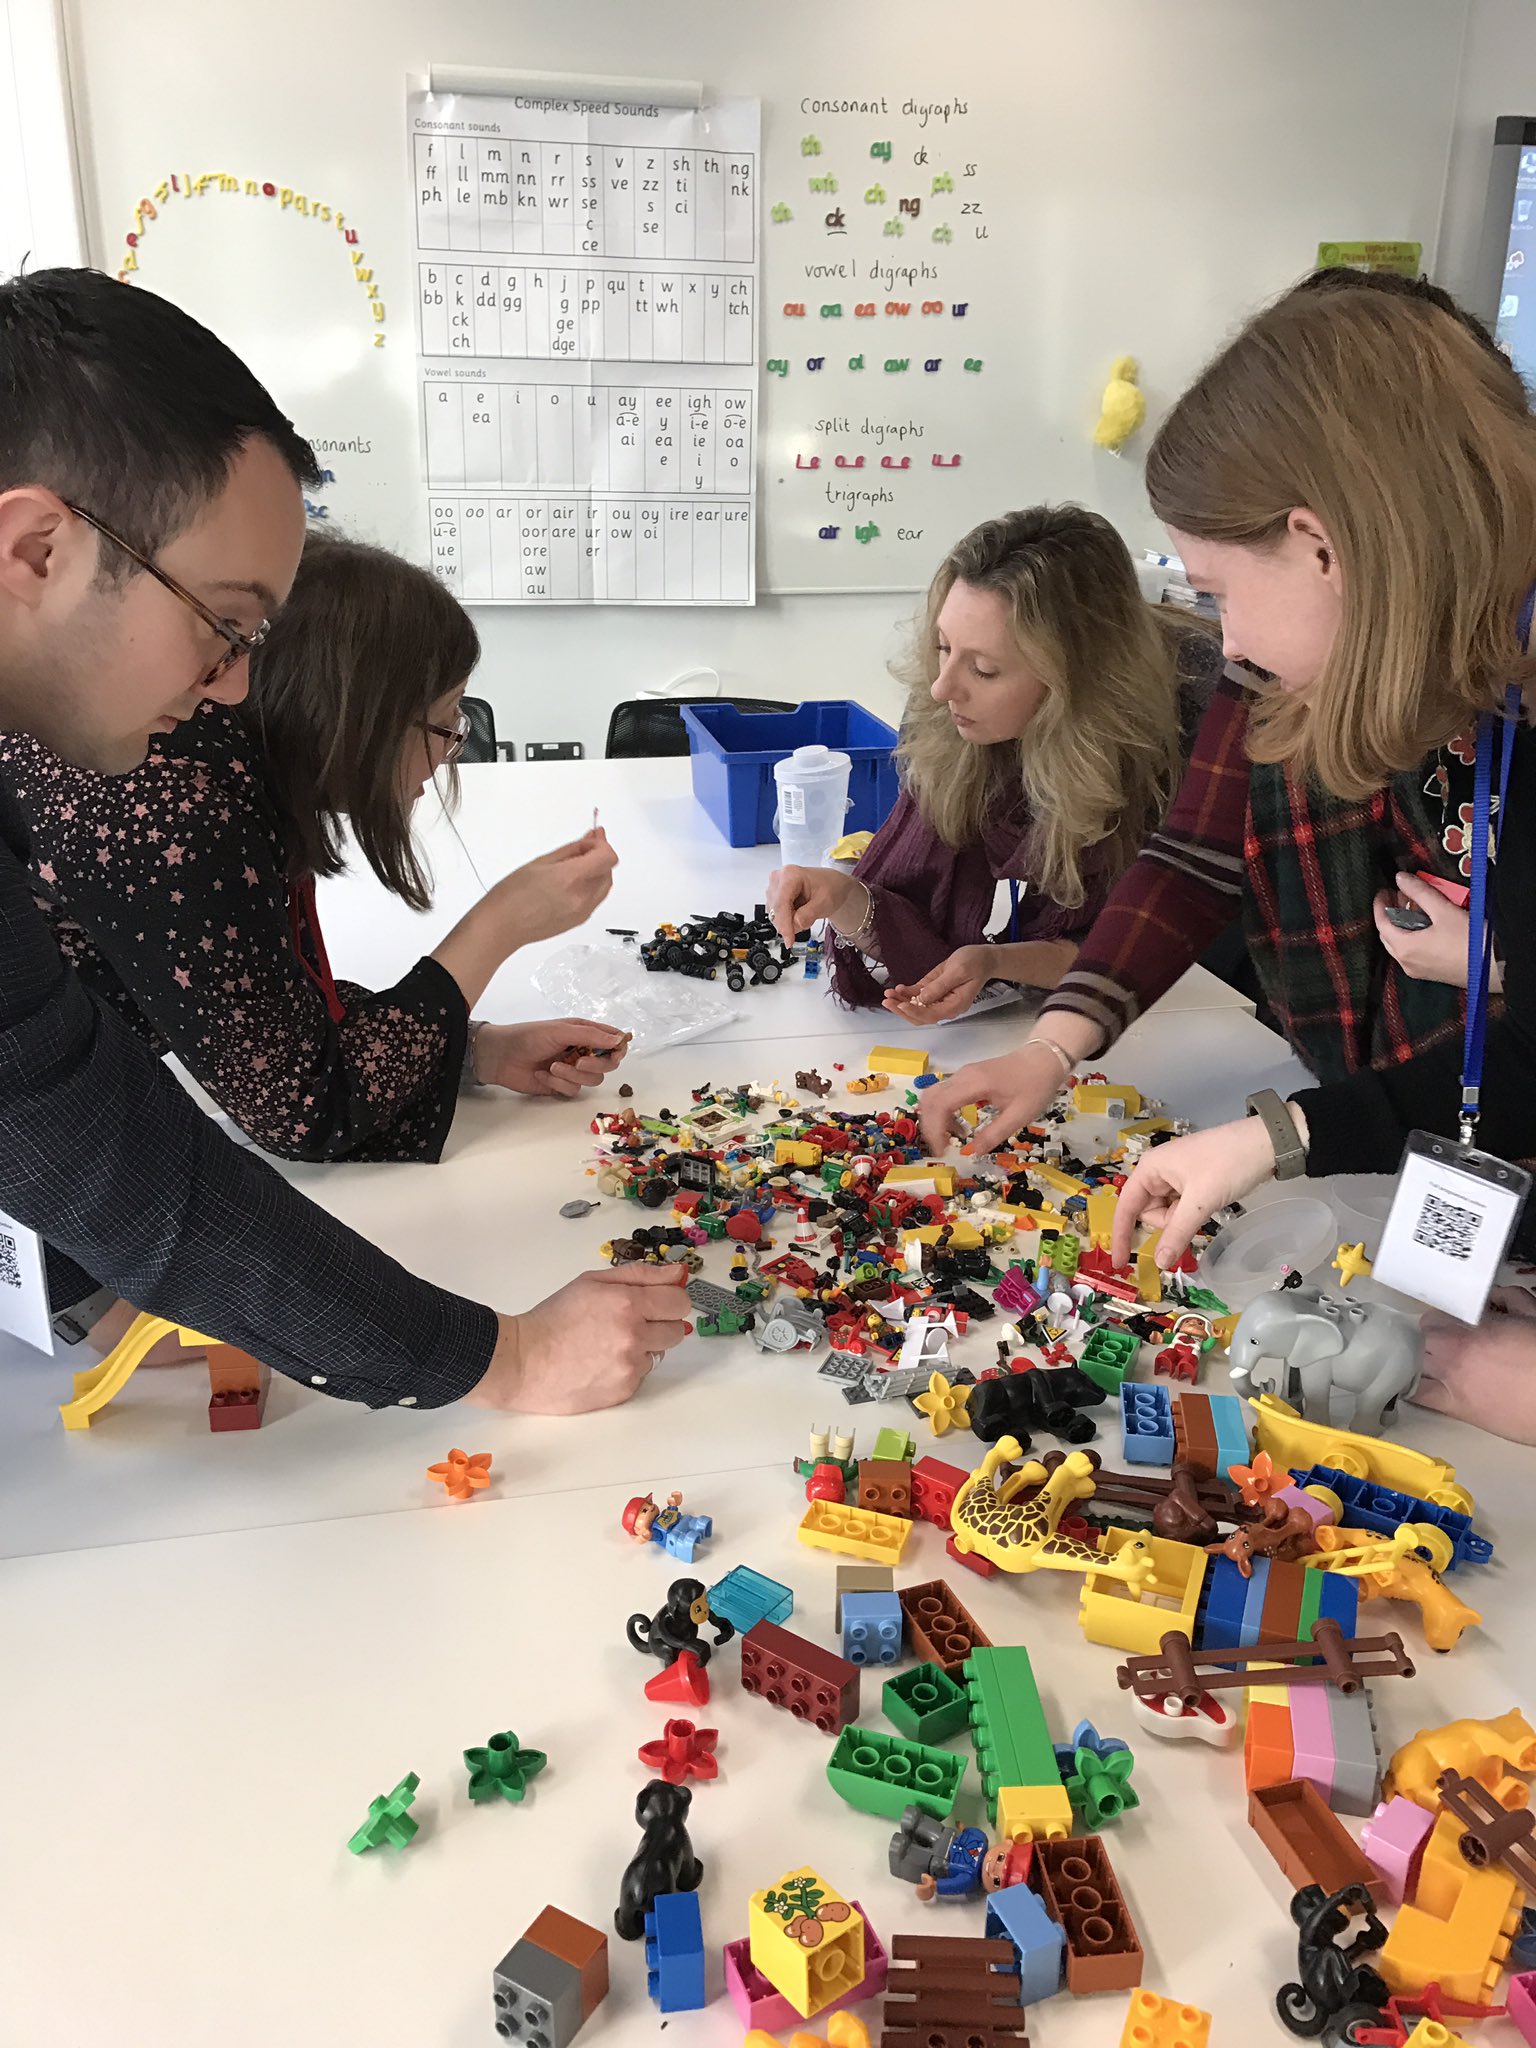 #SocMedHE17 team thanks 4 an amazing conference, huge thanks 2 @suebecks 4 inviting me to co-run a #LegoSeriousPlay session, I had a blast! https://t.co/OZKxNWsERe